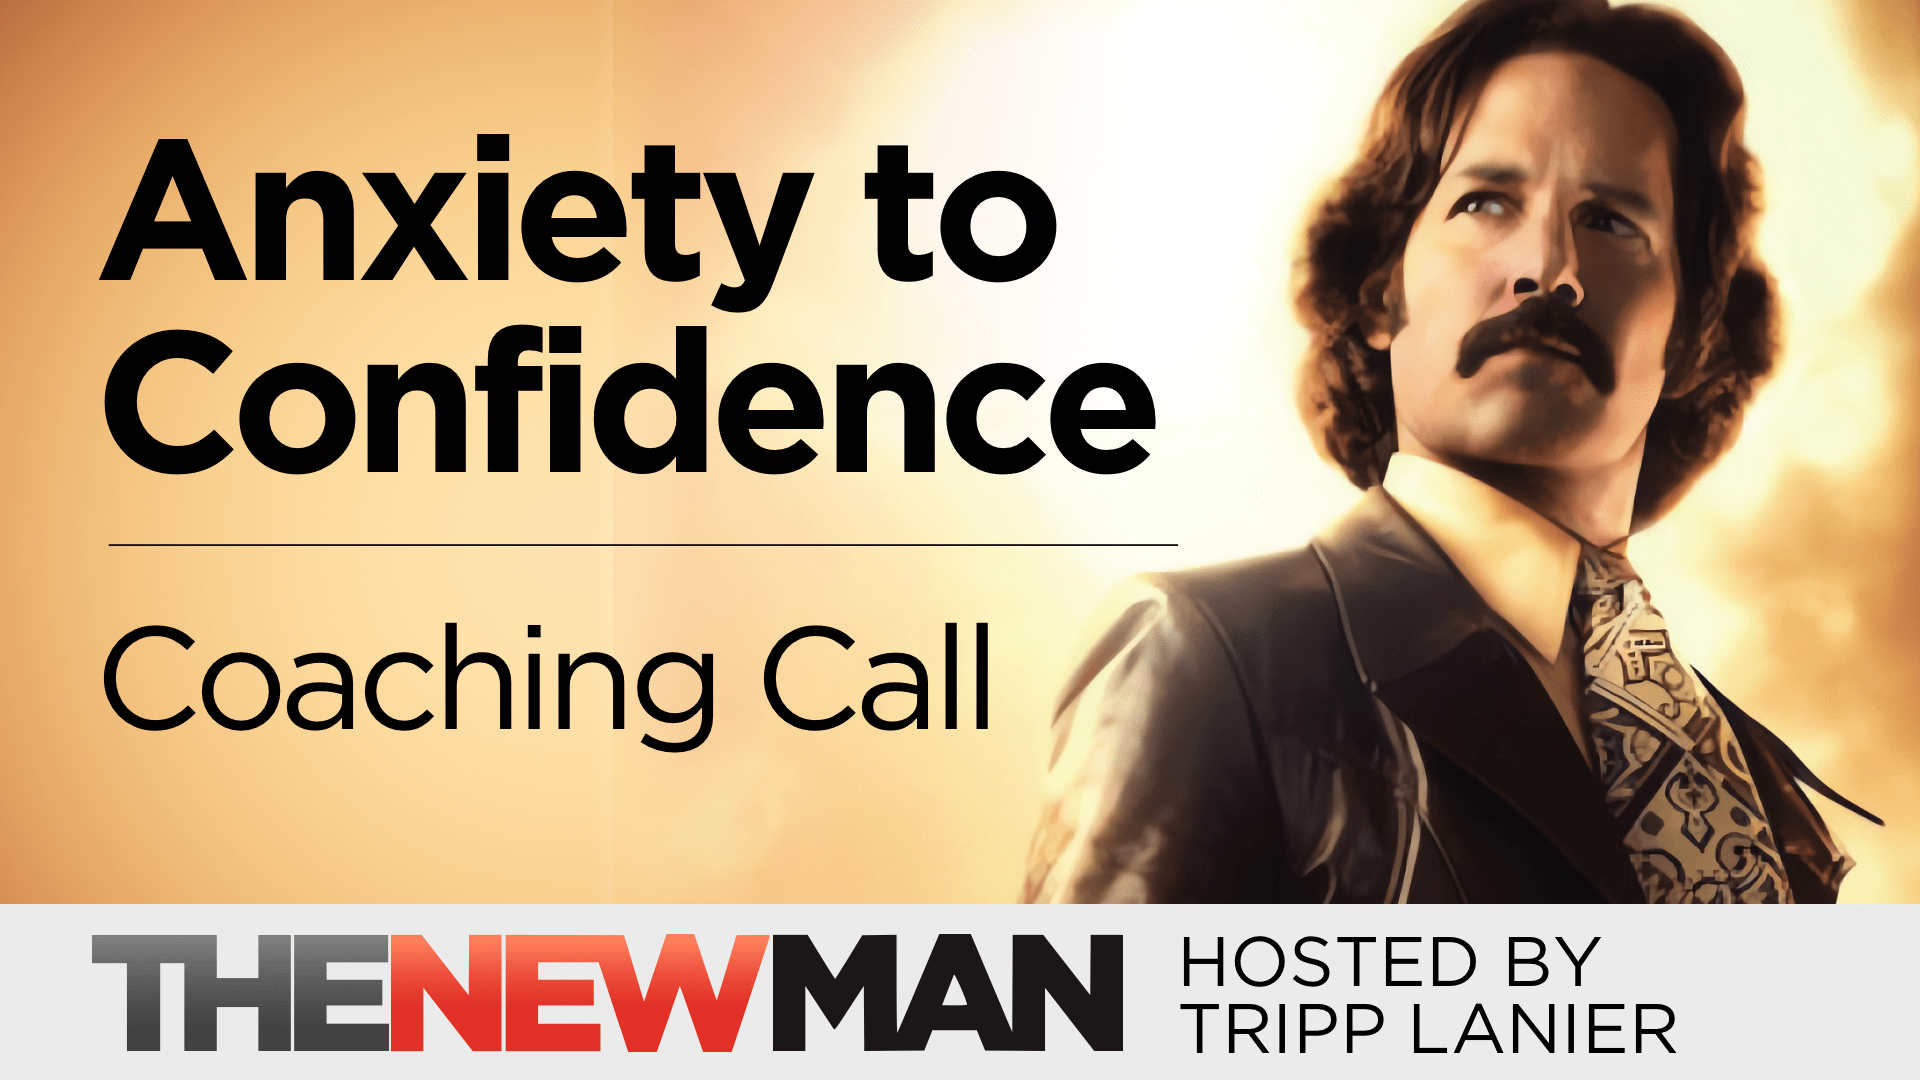 Moving from Anxiety to Confidence — Coaching Call with Tripp Lanier